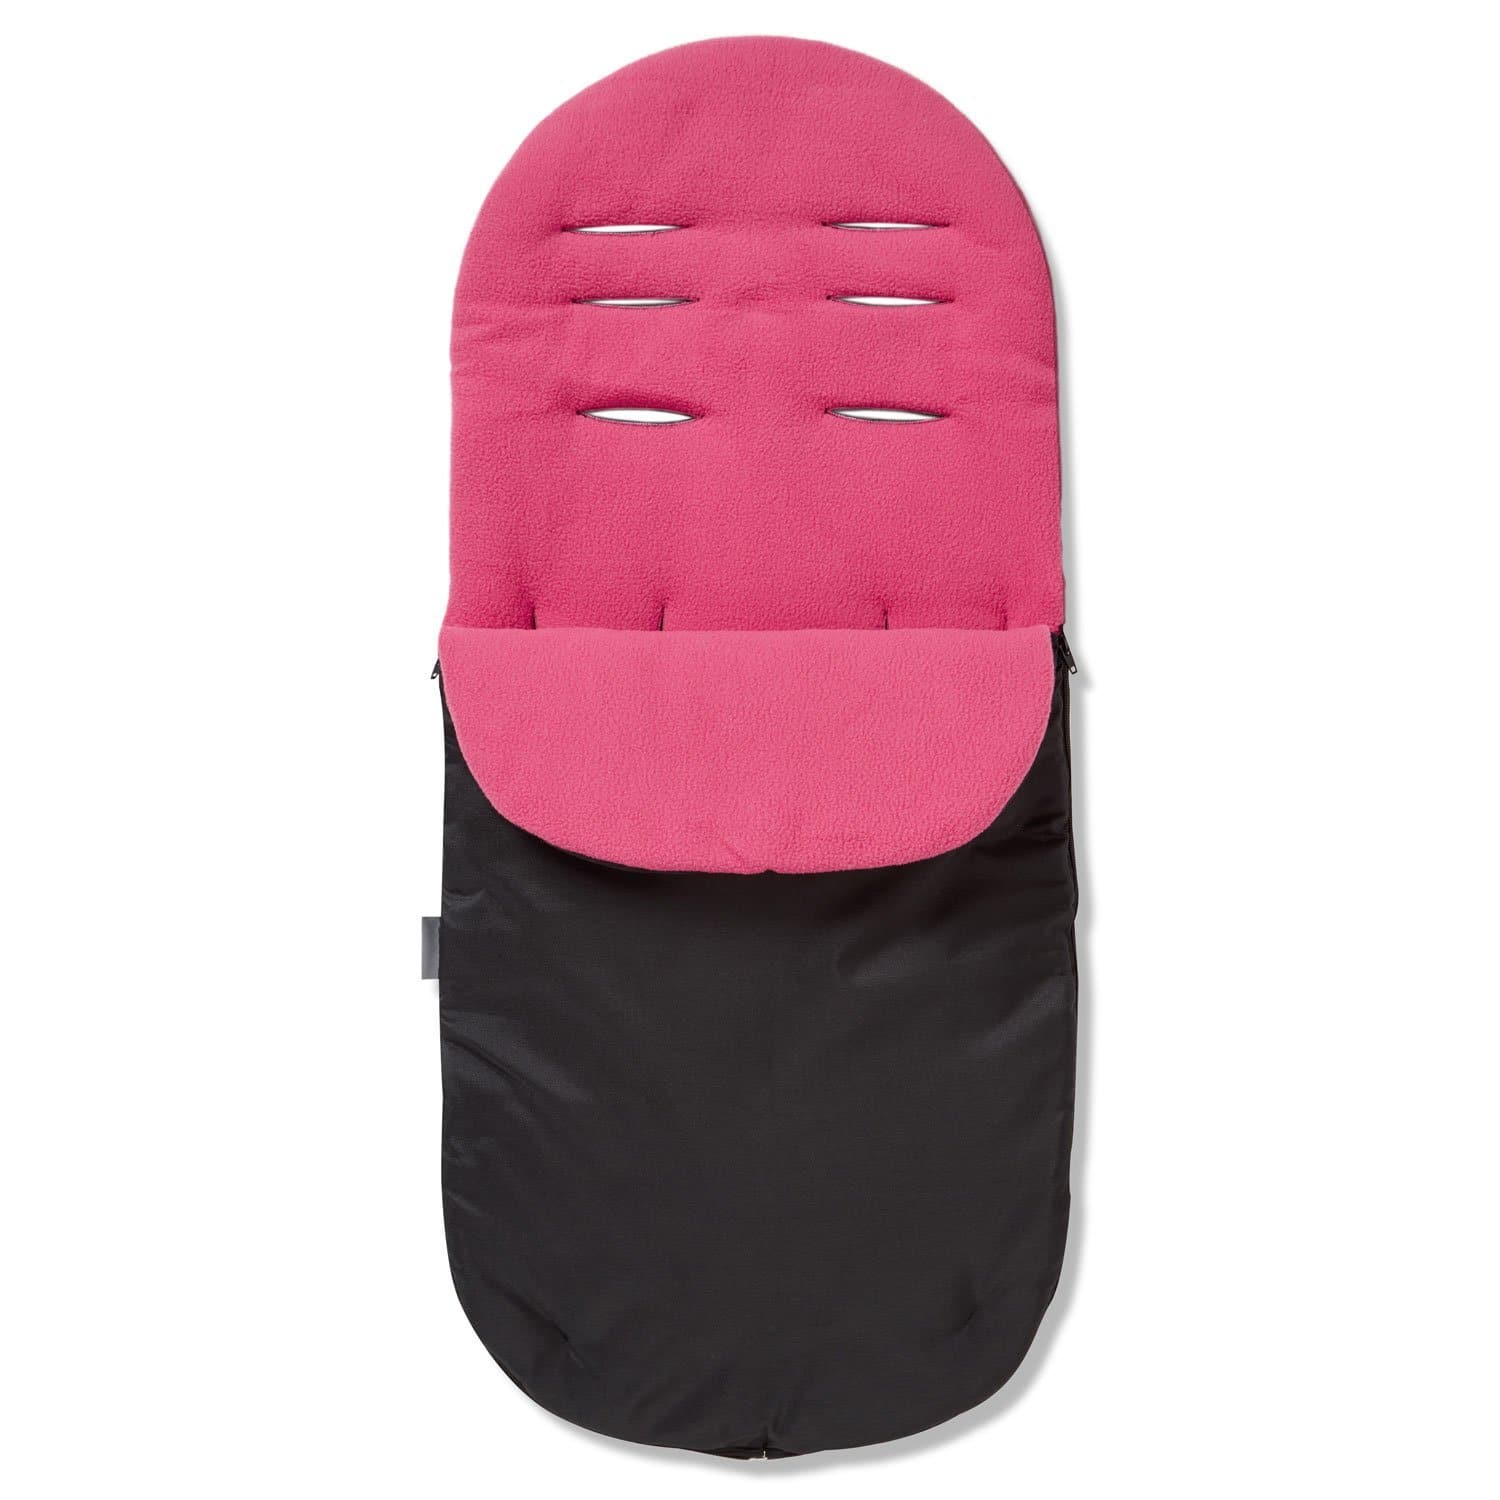 Footmuff / Cosy Toes Compatible with Red Castle - For Your Little One